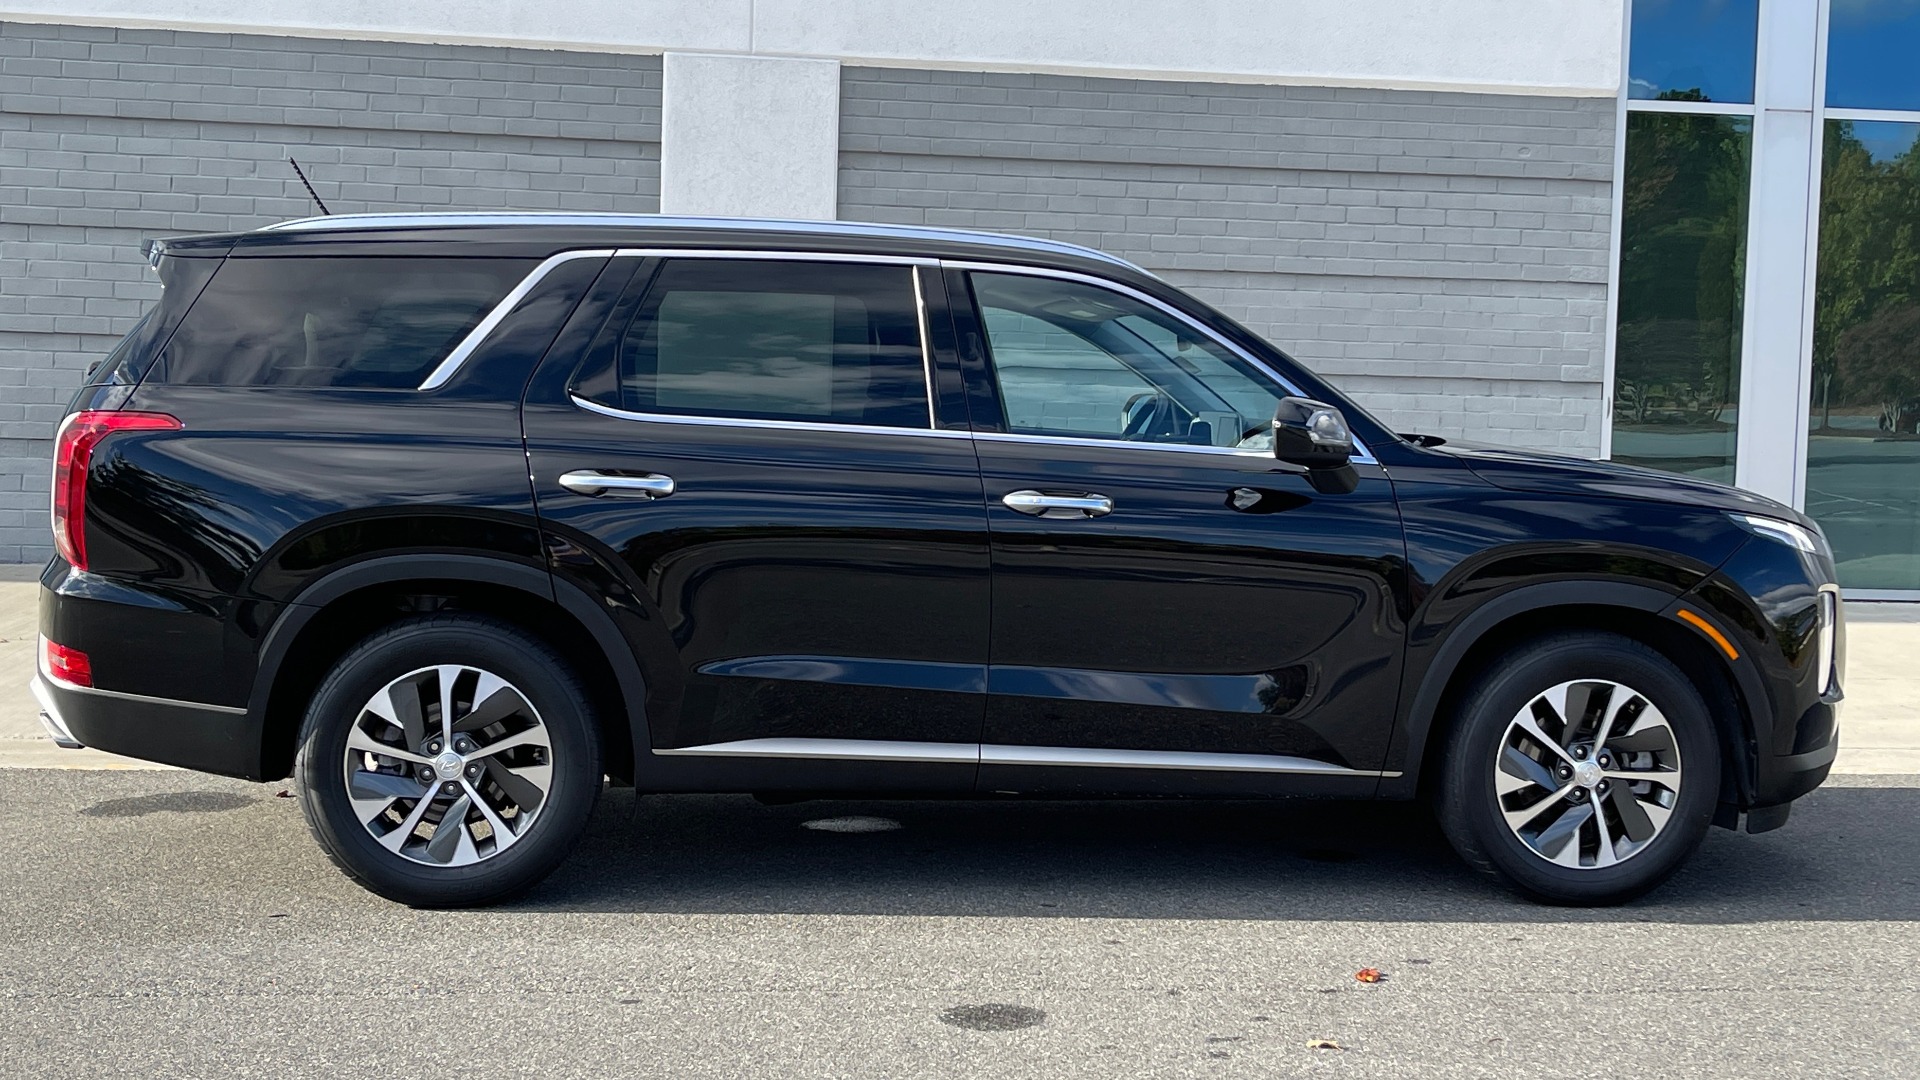 Used 2020 Hyundai PALISADE SEL / 3.8L V6 / FWD / 8-SPD AUTO / SUNROOF / 3-ROW / REARVIEW for sale Sold at Formula Imports in Charlotte NC 28227 6